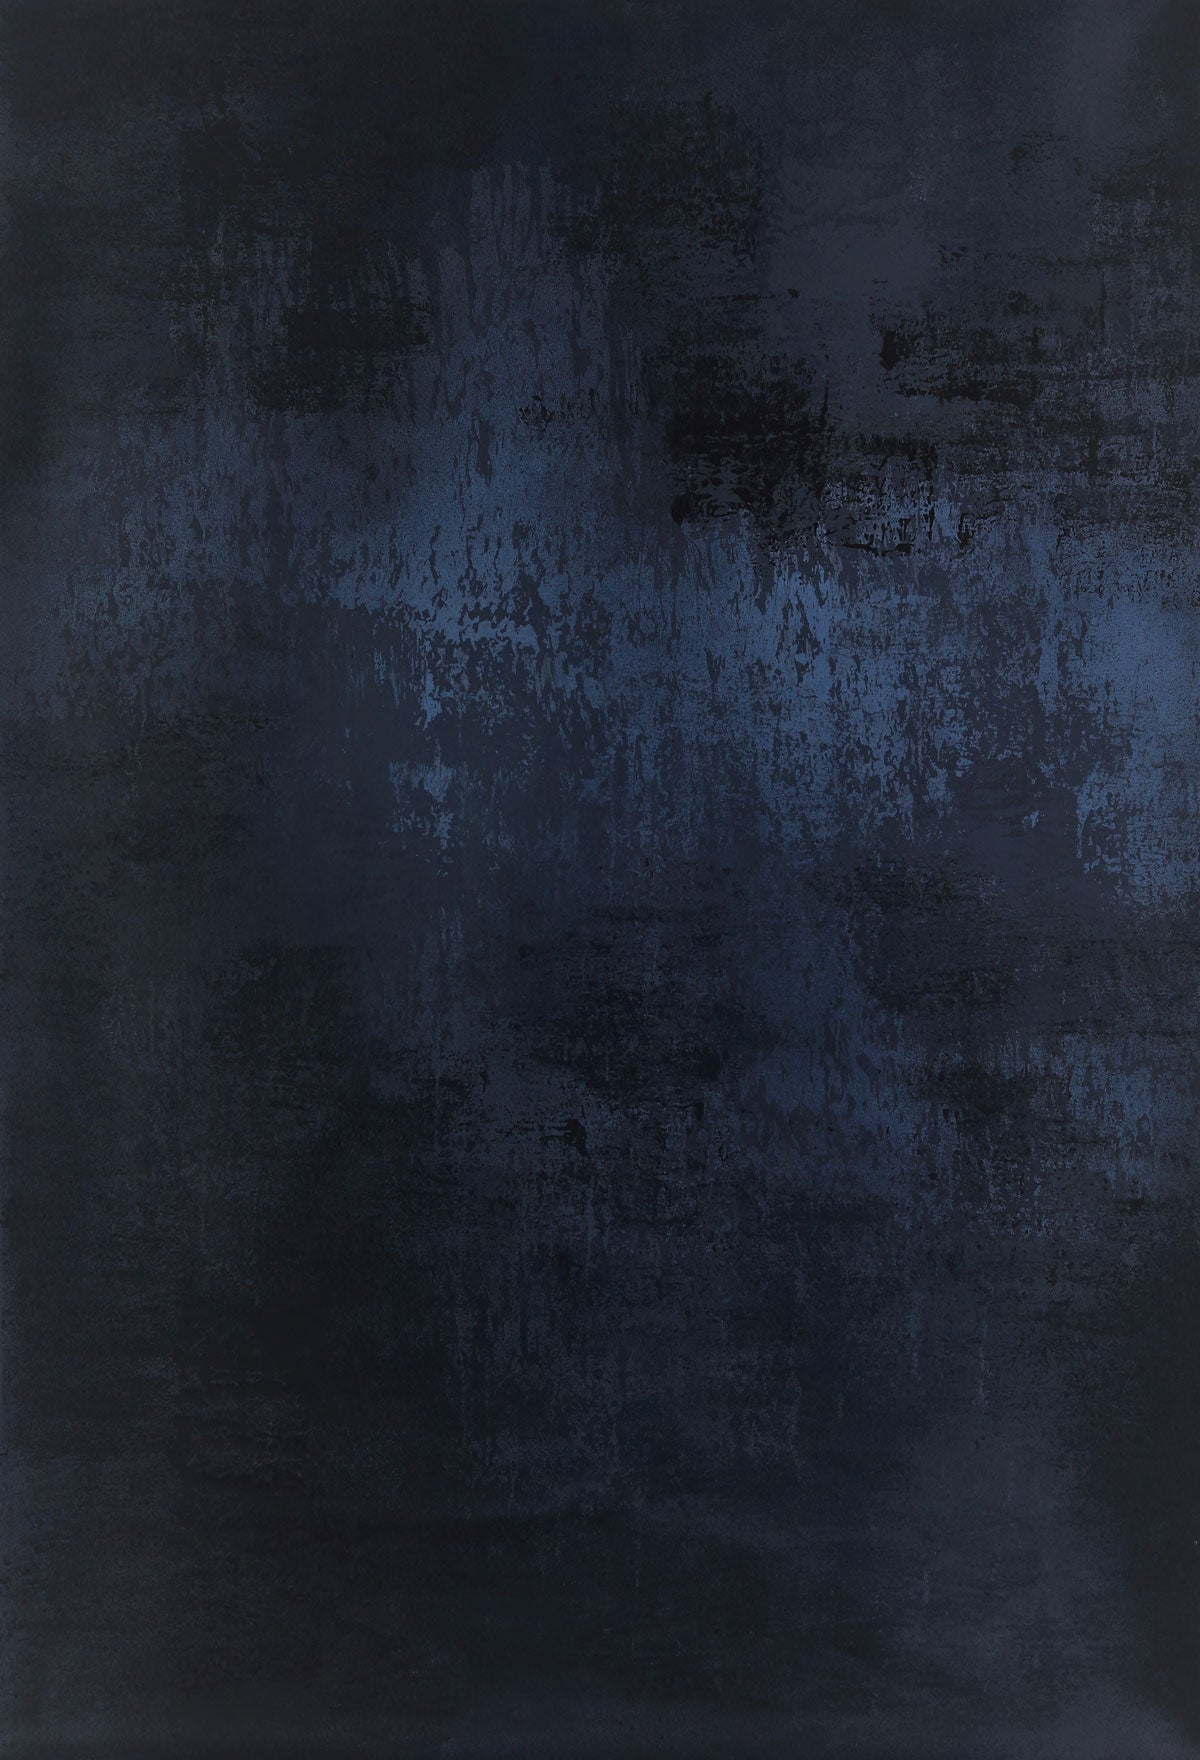 Kate Dark Cold Black-Blue Abstract Texture Backdrop for Portrait Photography